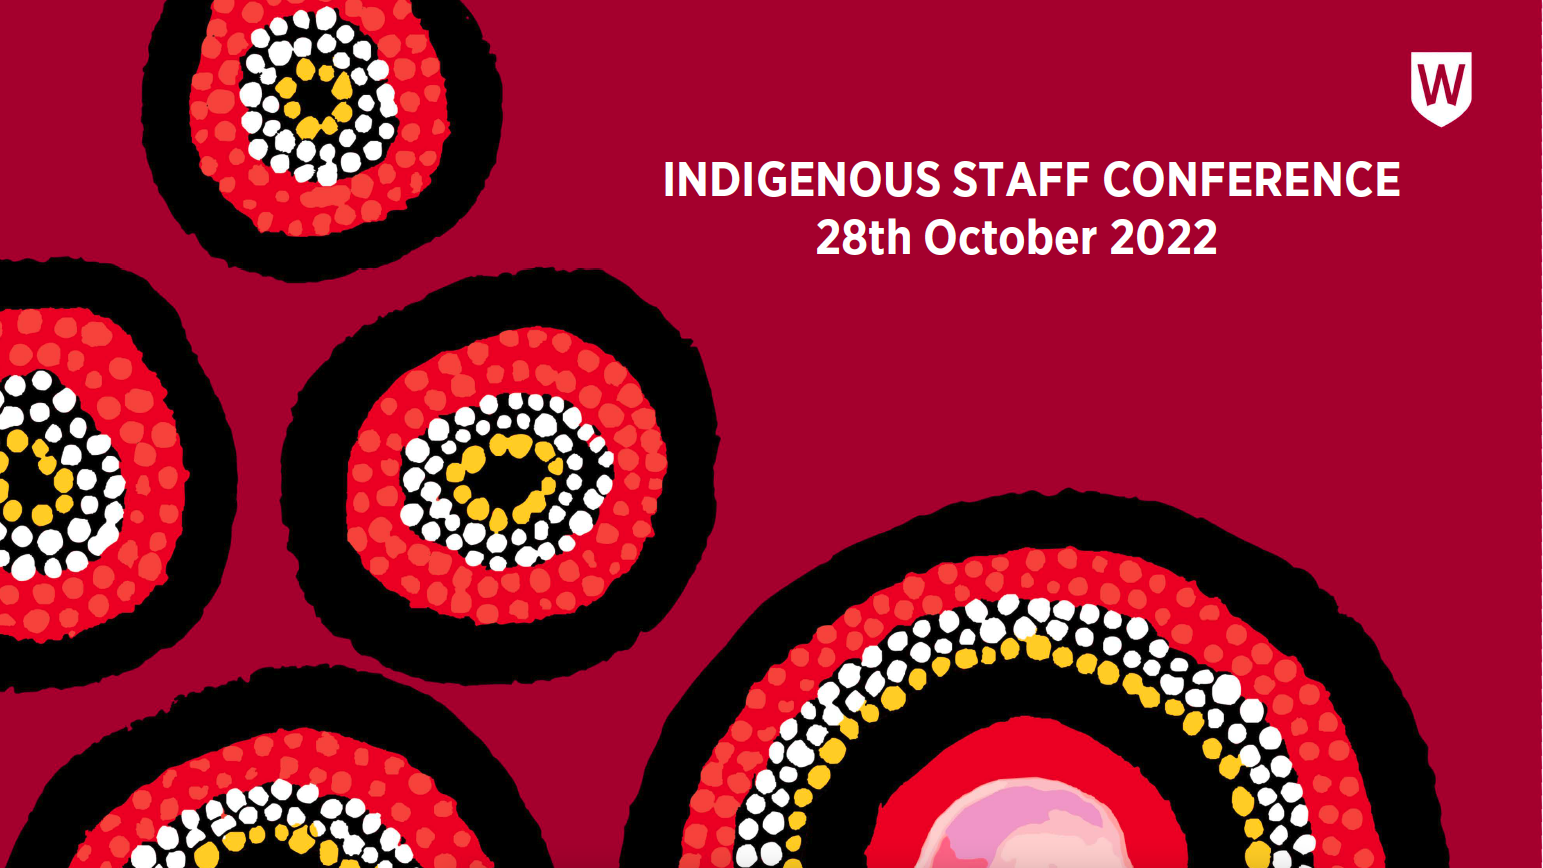 Indigenous Staff Conference 2022